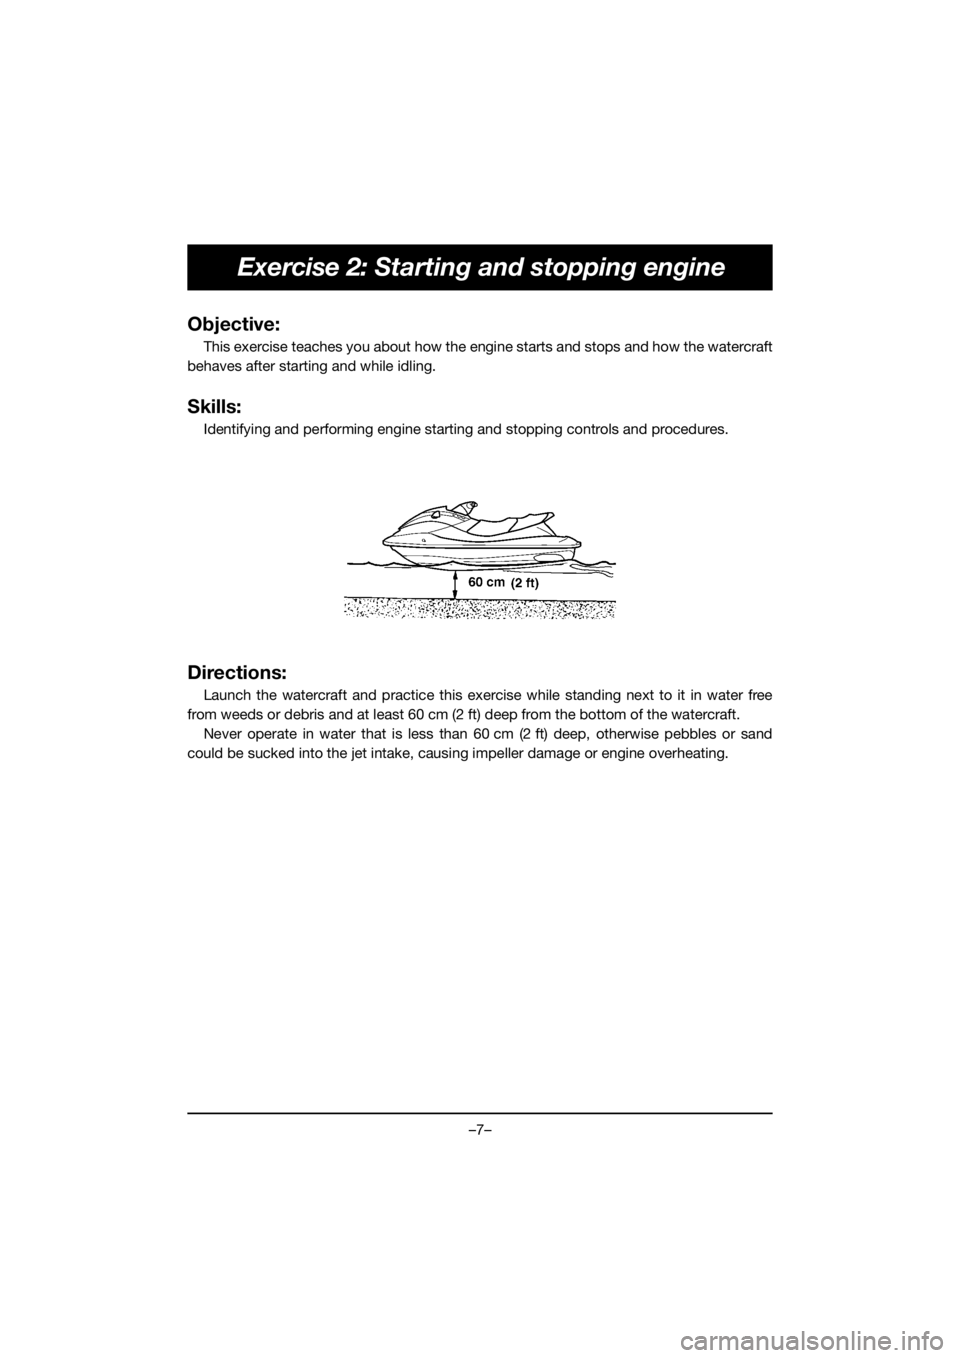 YAMAHA EX 2020  Bruksanvisningar (in Swedish) –7–
Exercise 2: Starting and stopping engine
Objective:
This exercise teaches you about how the engine starts and stops and how the watercraft
behaves after starting and while idling.
Skills:
Iden